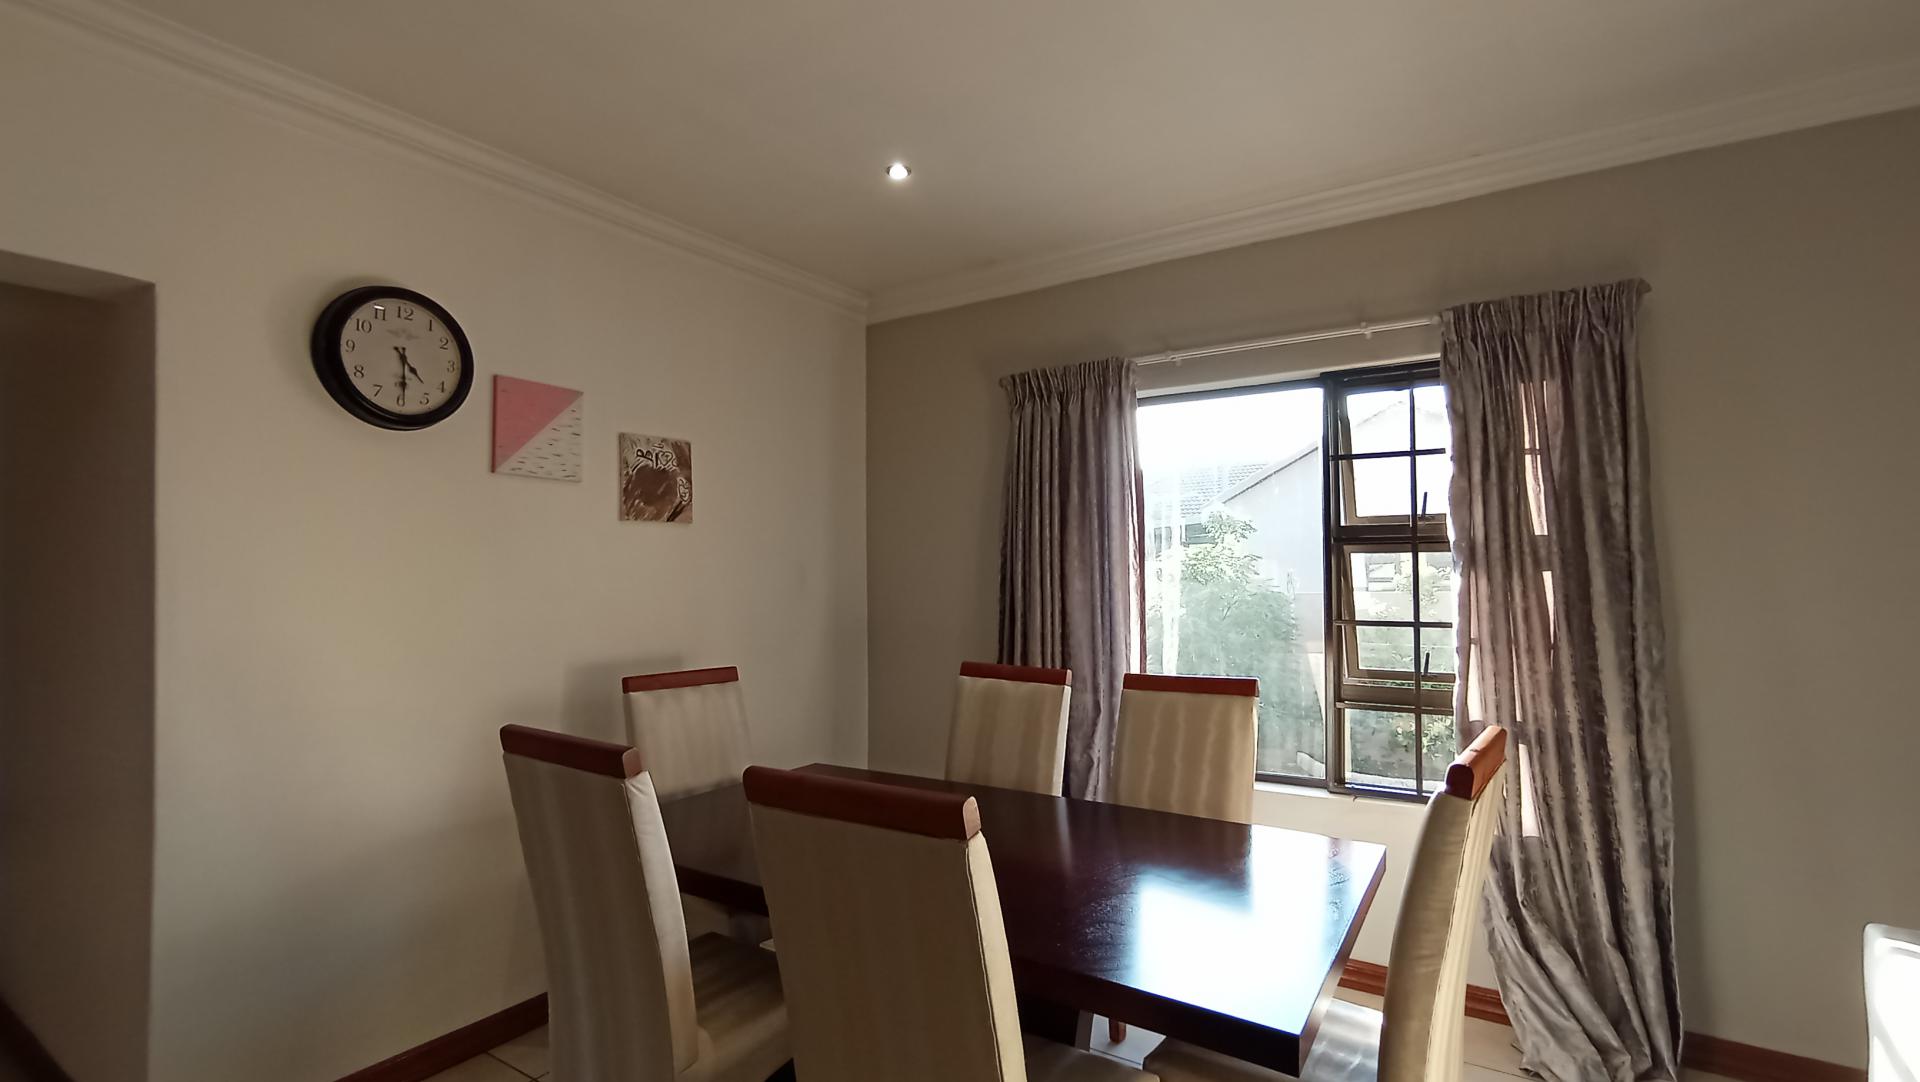 Dining Room - 25 square meters of property in Rua Vista